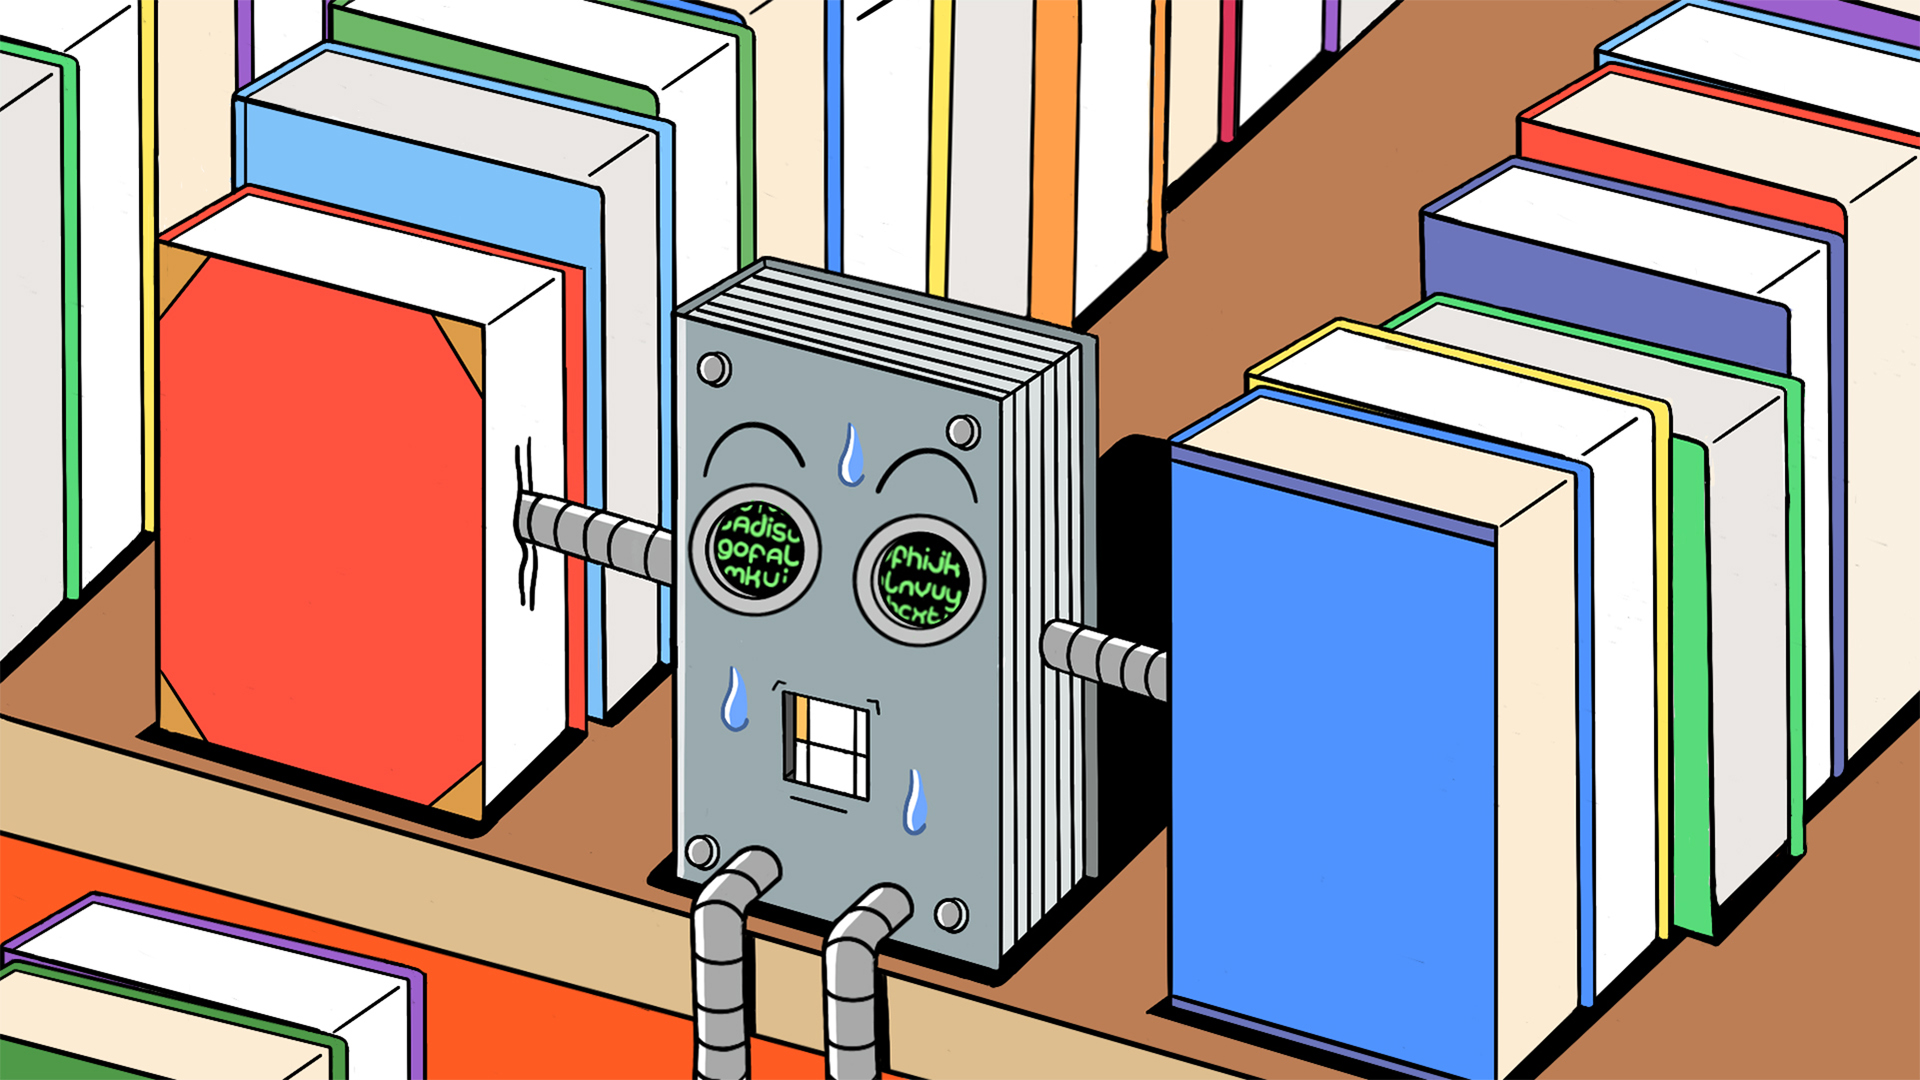 Illustration of a robot and some books